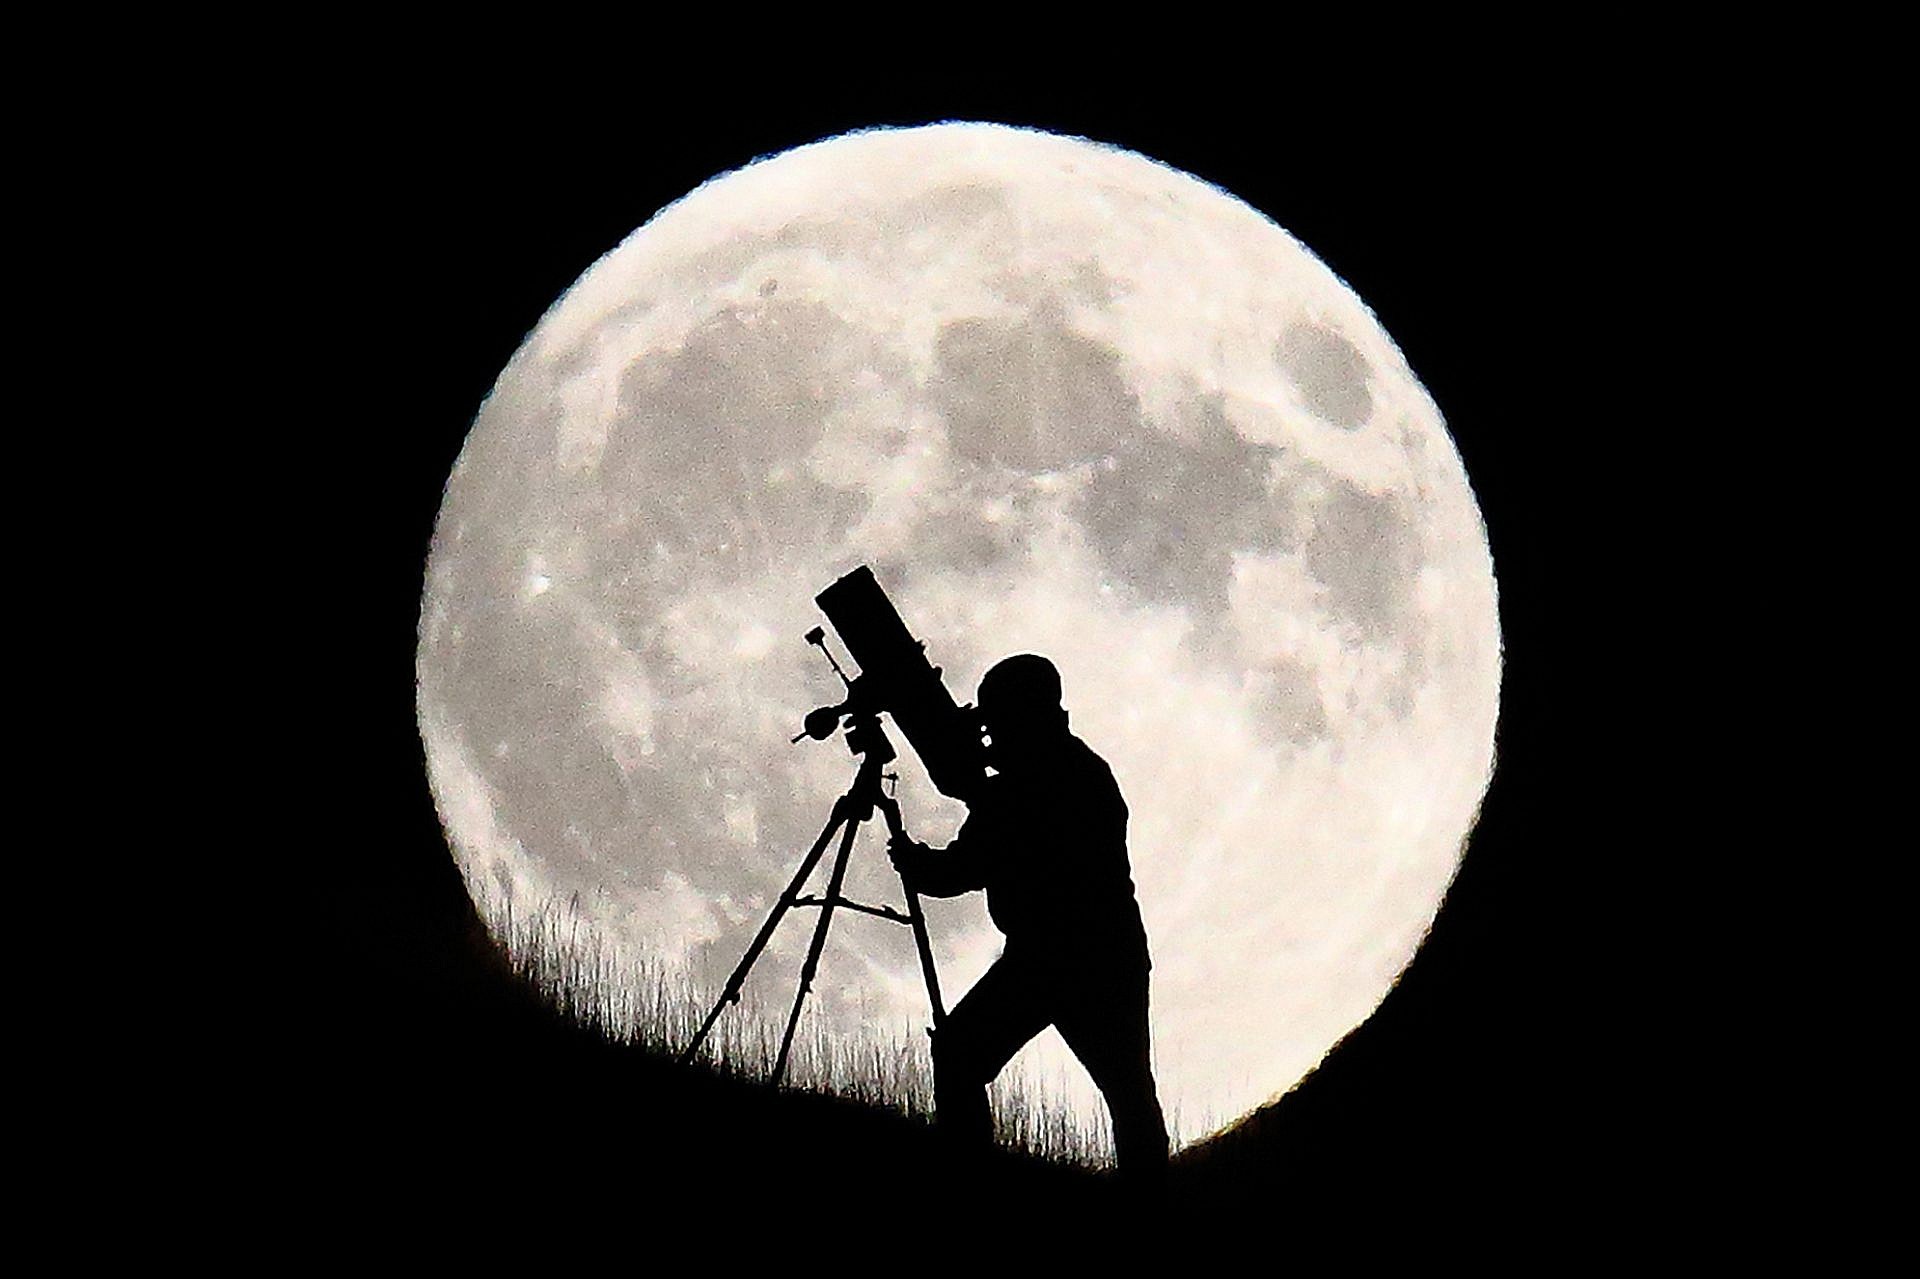 BRIGHTON, UNITED KINGDOM - SEPTEMBER 27: An astronomer stargazes ahead of tonight's supermoon on September 27, 2015 in Brighton, England. Tonight's supermoon, so called because it is the closest full moon to the Earth this year, is particularly rare as it coincides with a lunar eclipse, a combination that has not happened since 1982 and won't happen again until 2033. (Photo by Jordan Mansfield/Getty Images)